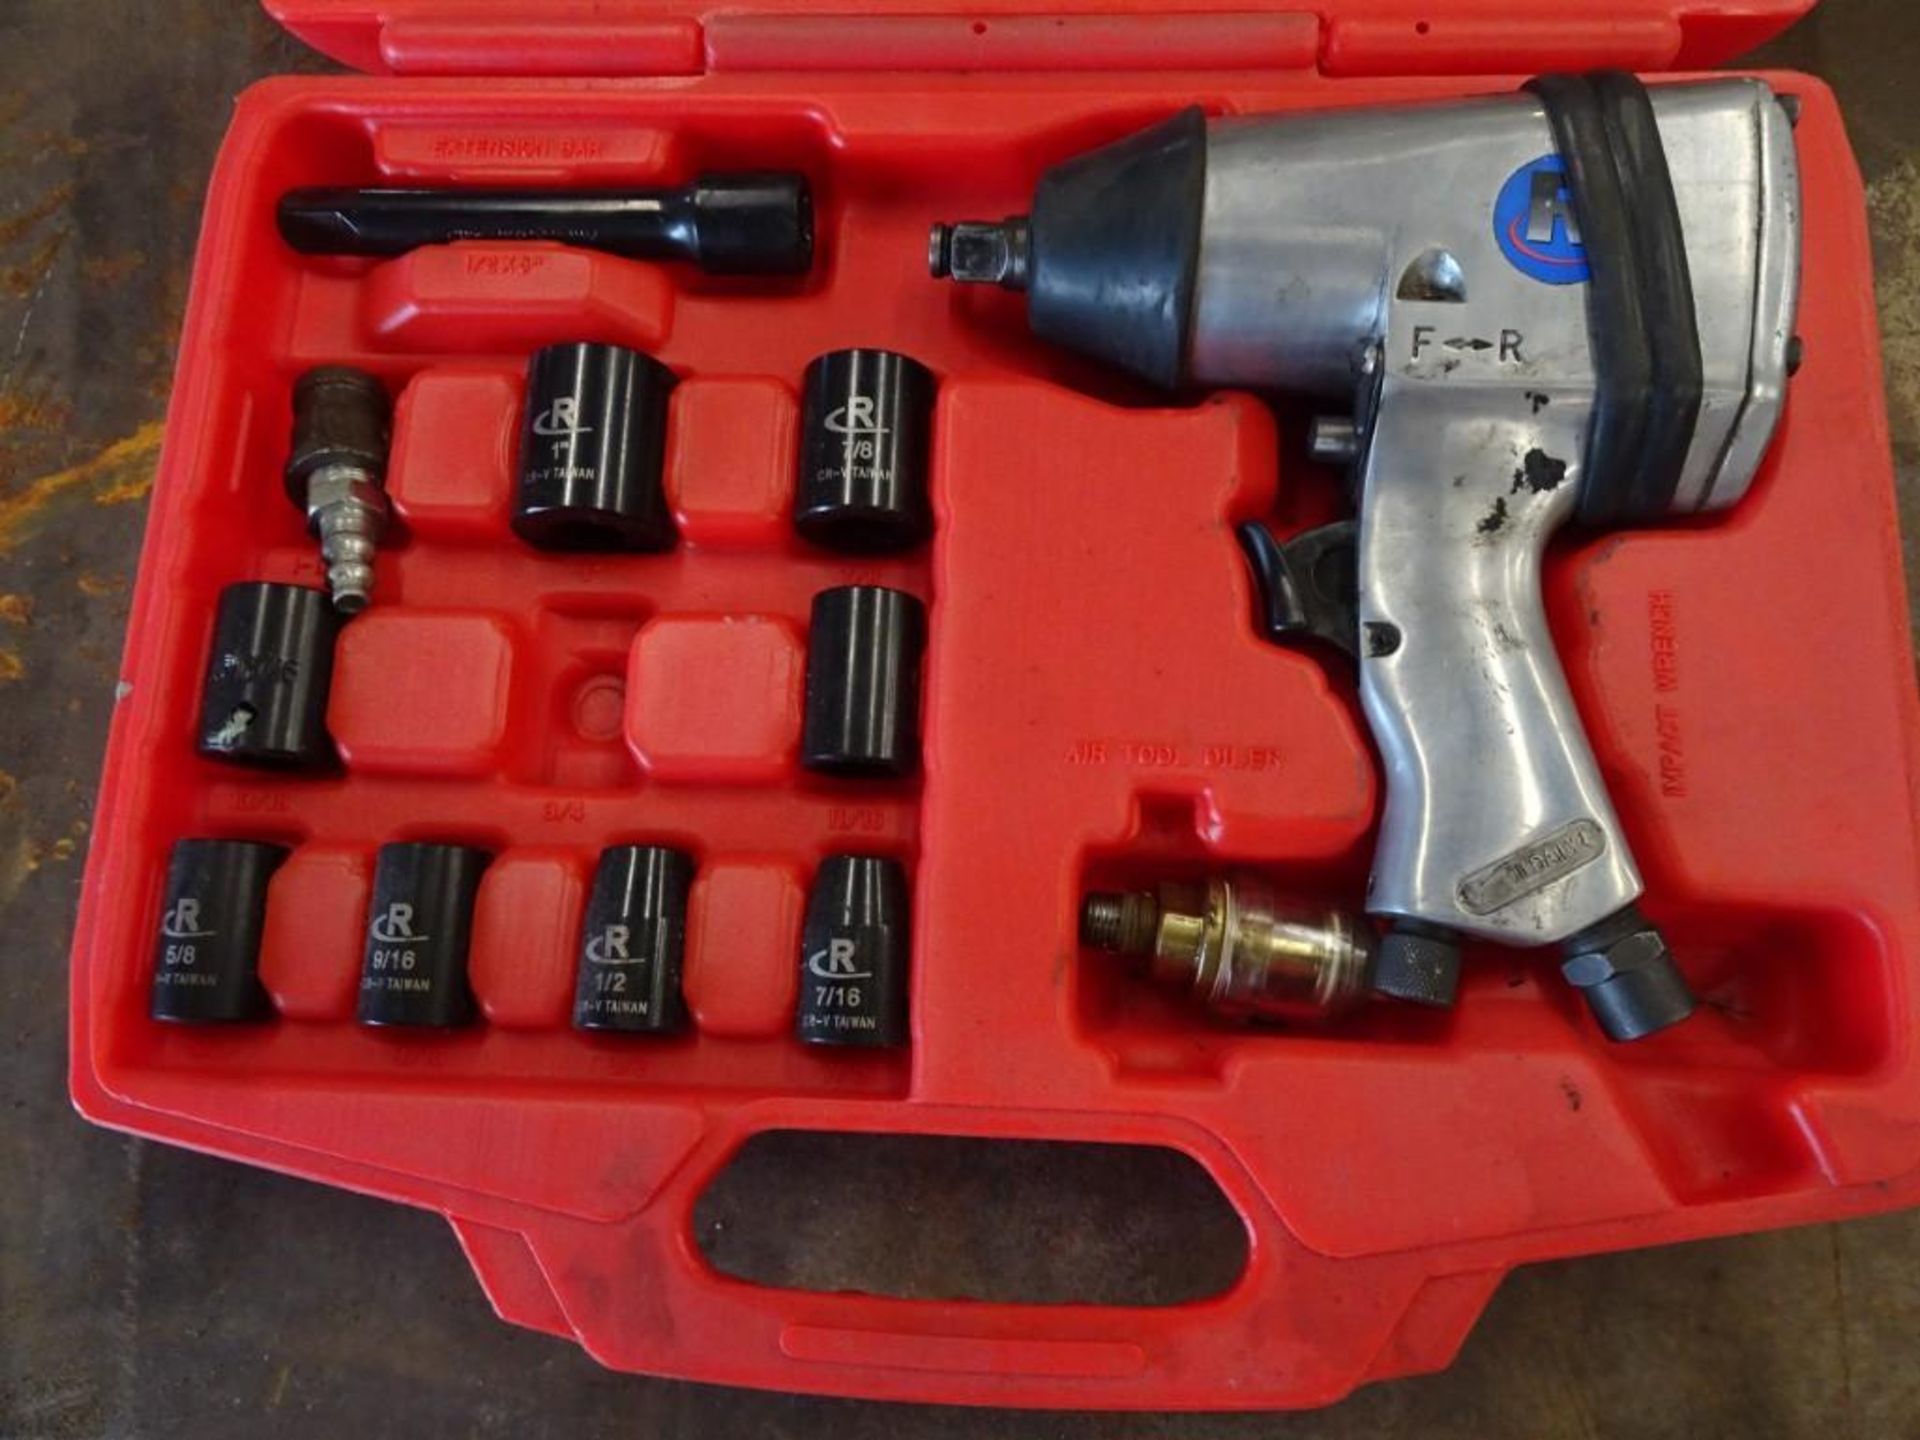 Rockford Impact Wrench